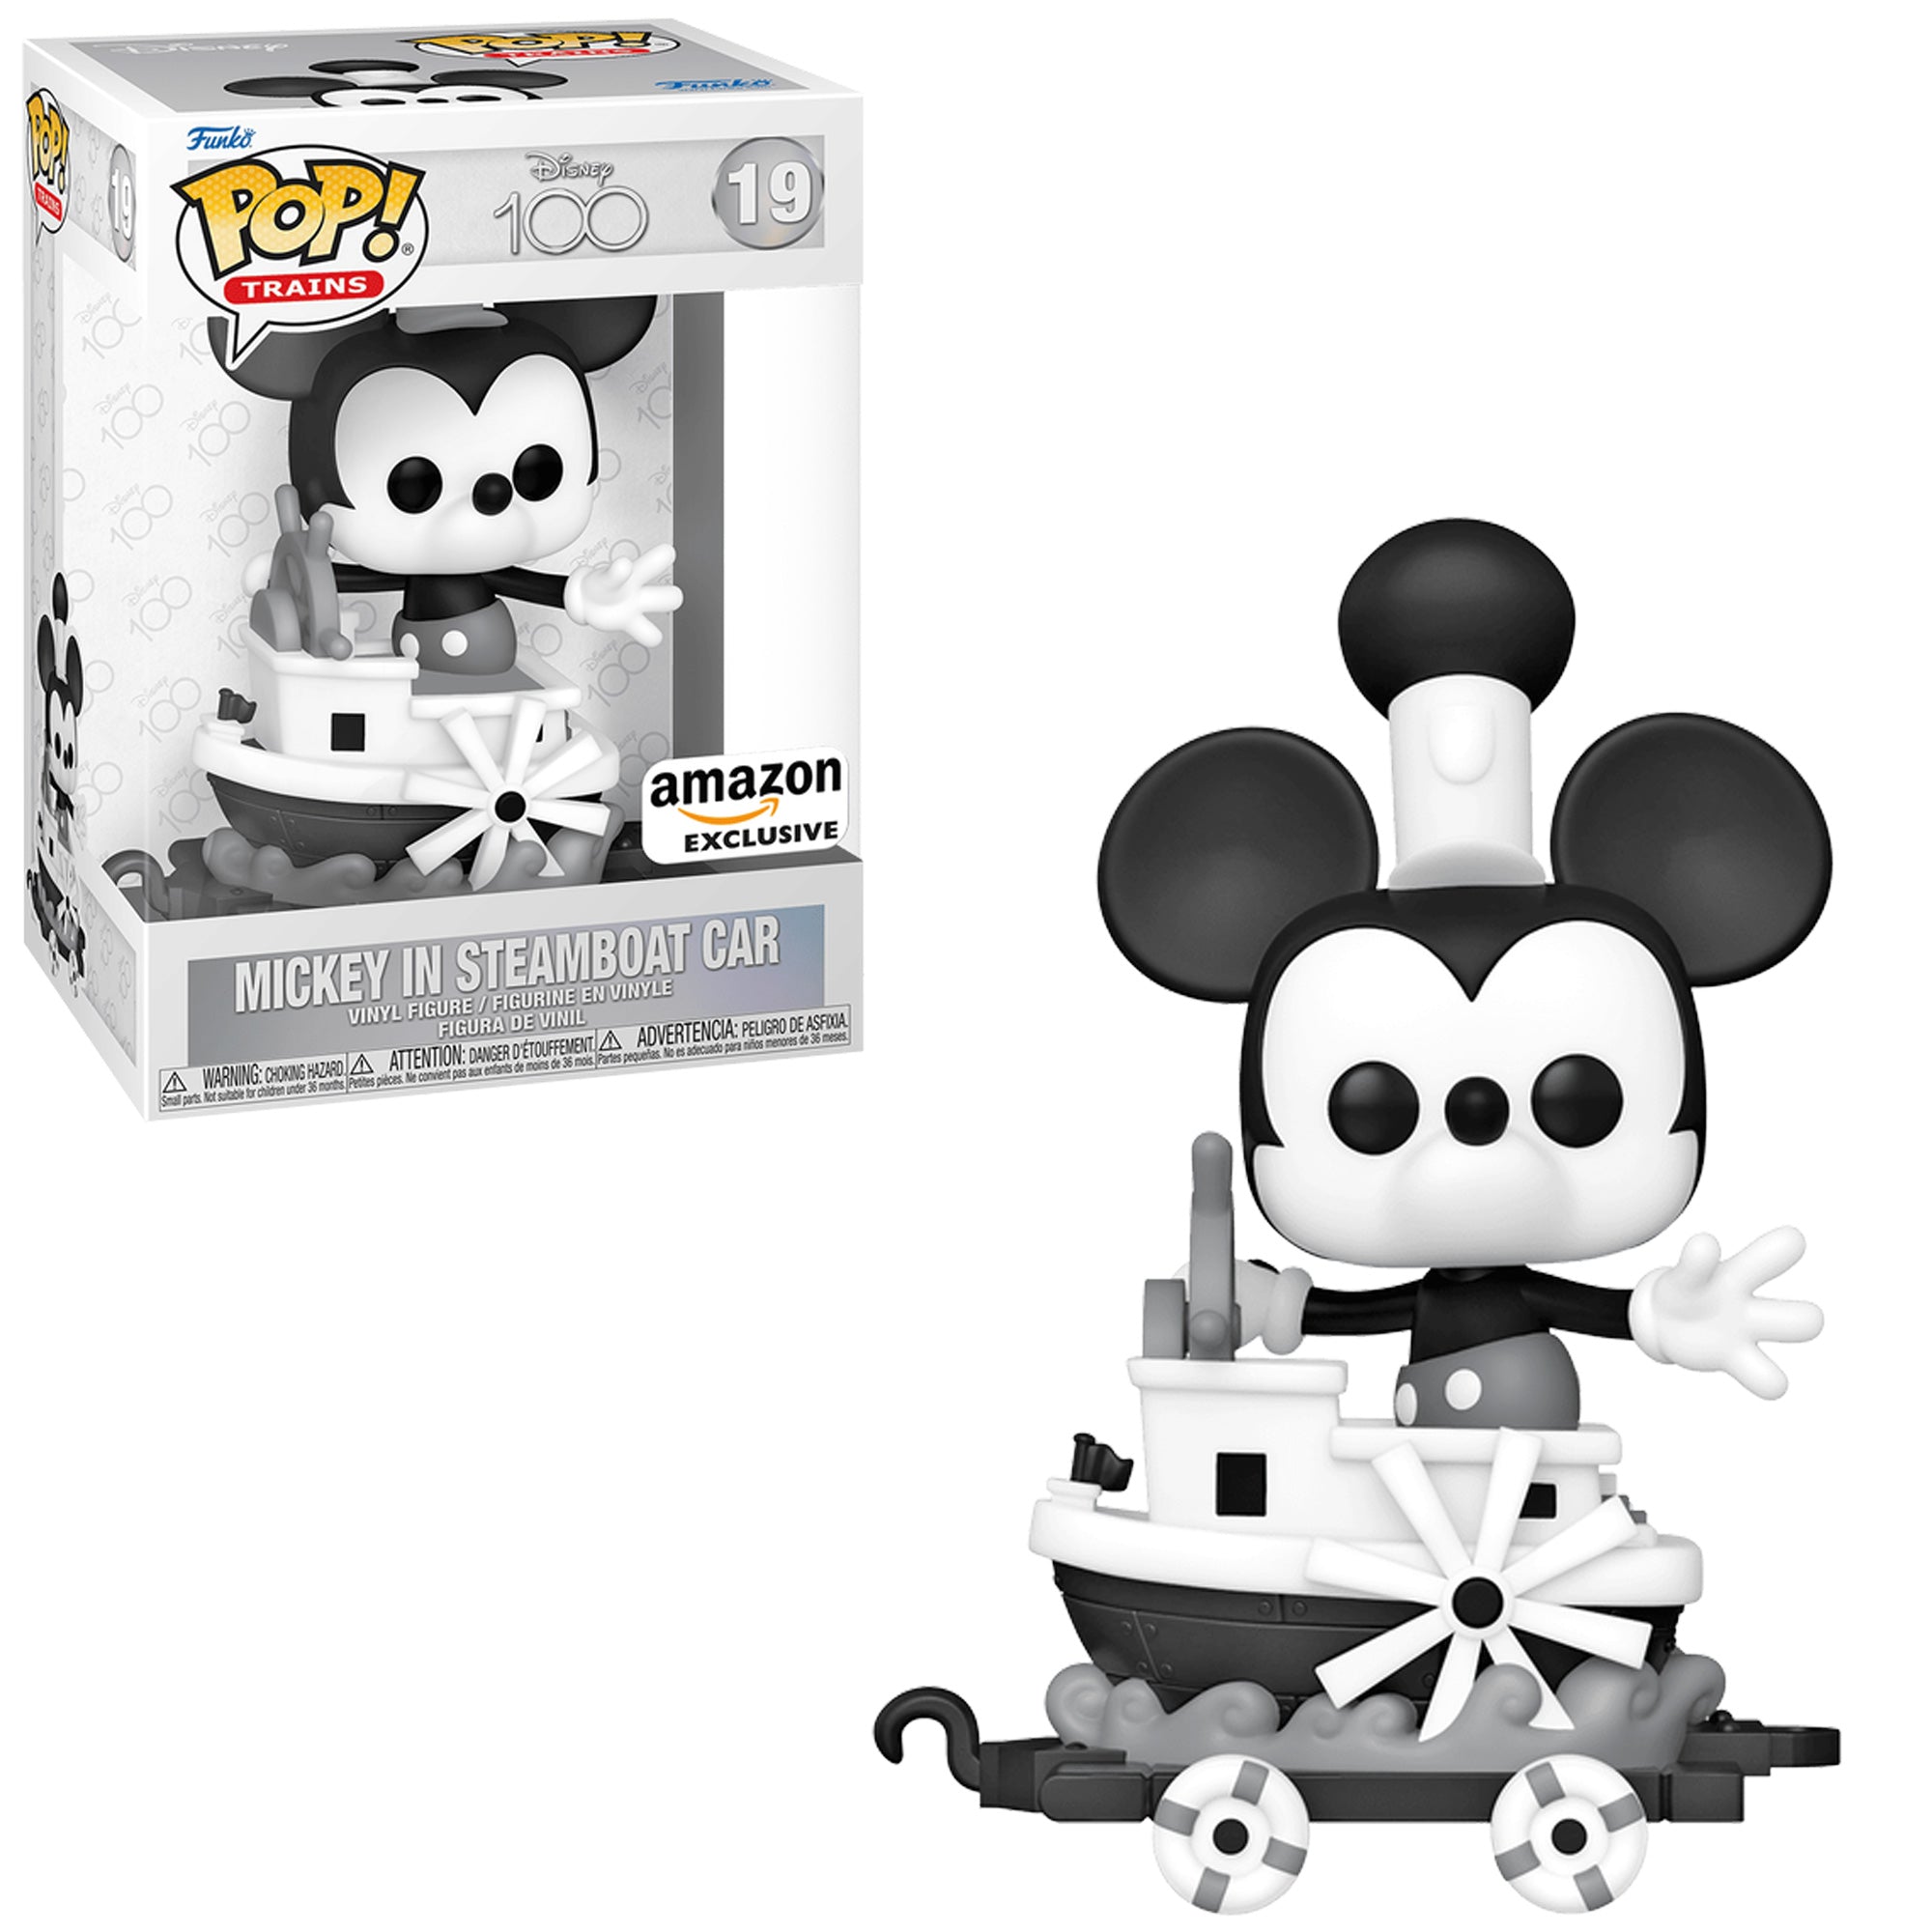 Disney 100 - Mickey in Steamboat Car - POP! Trains action figure 19